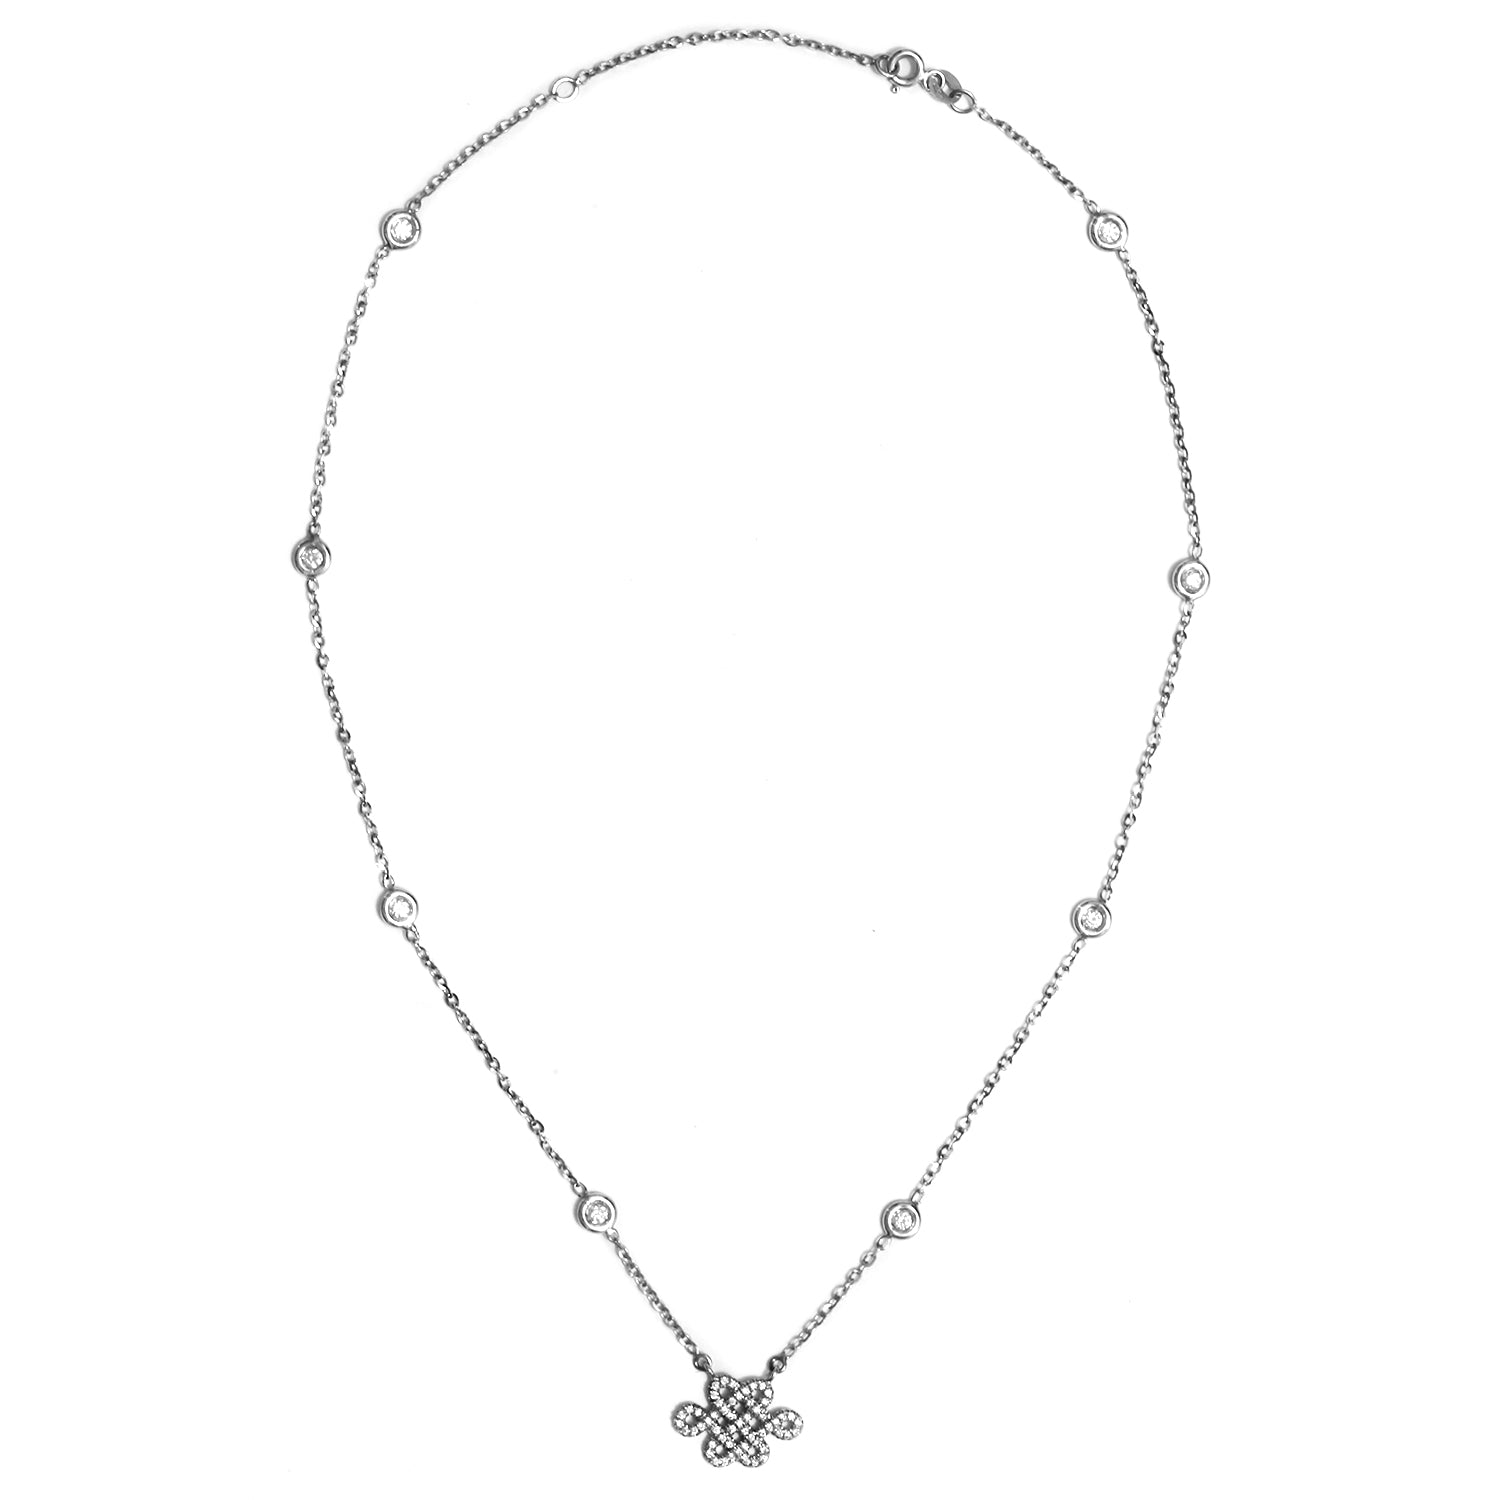 Tibetan Endless Love Knot Diamond by the yard Necklace ♥ ...